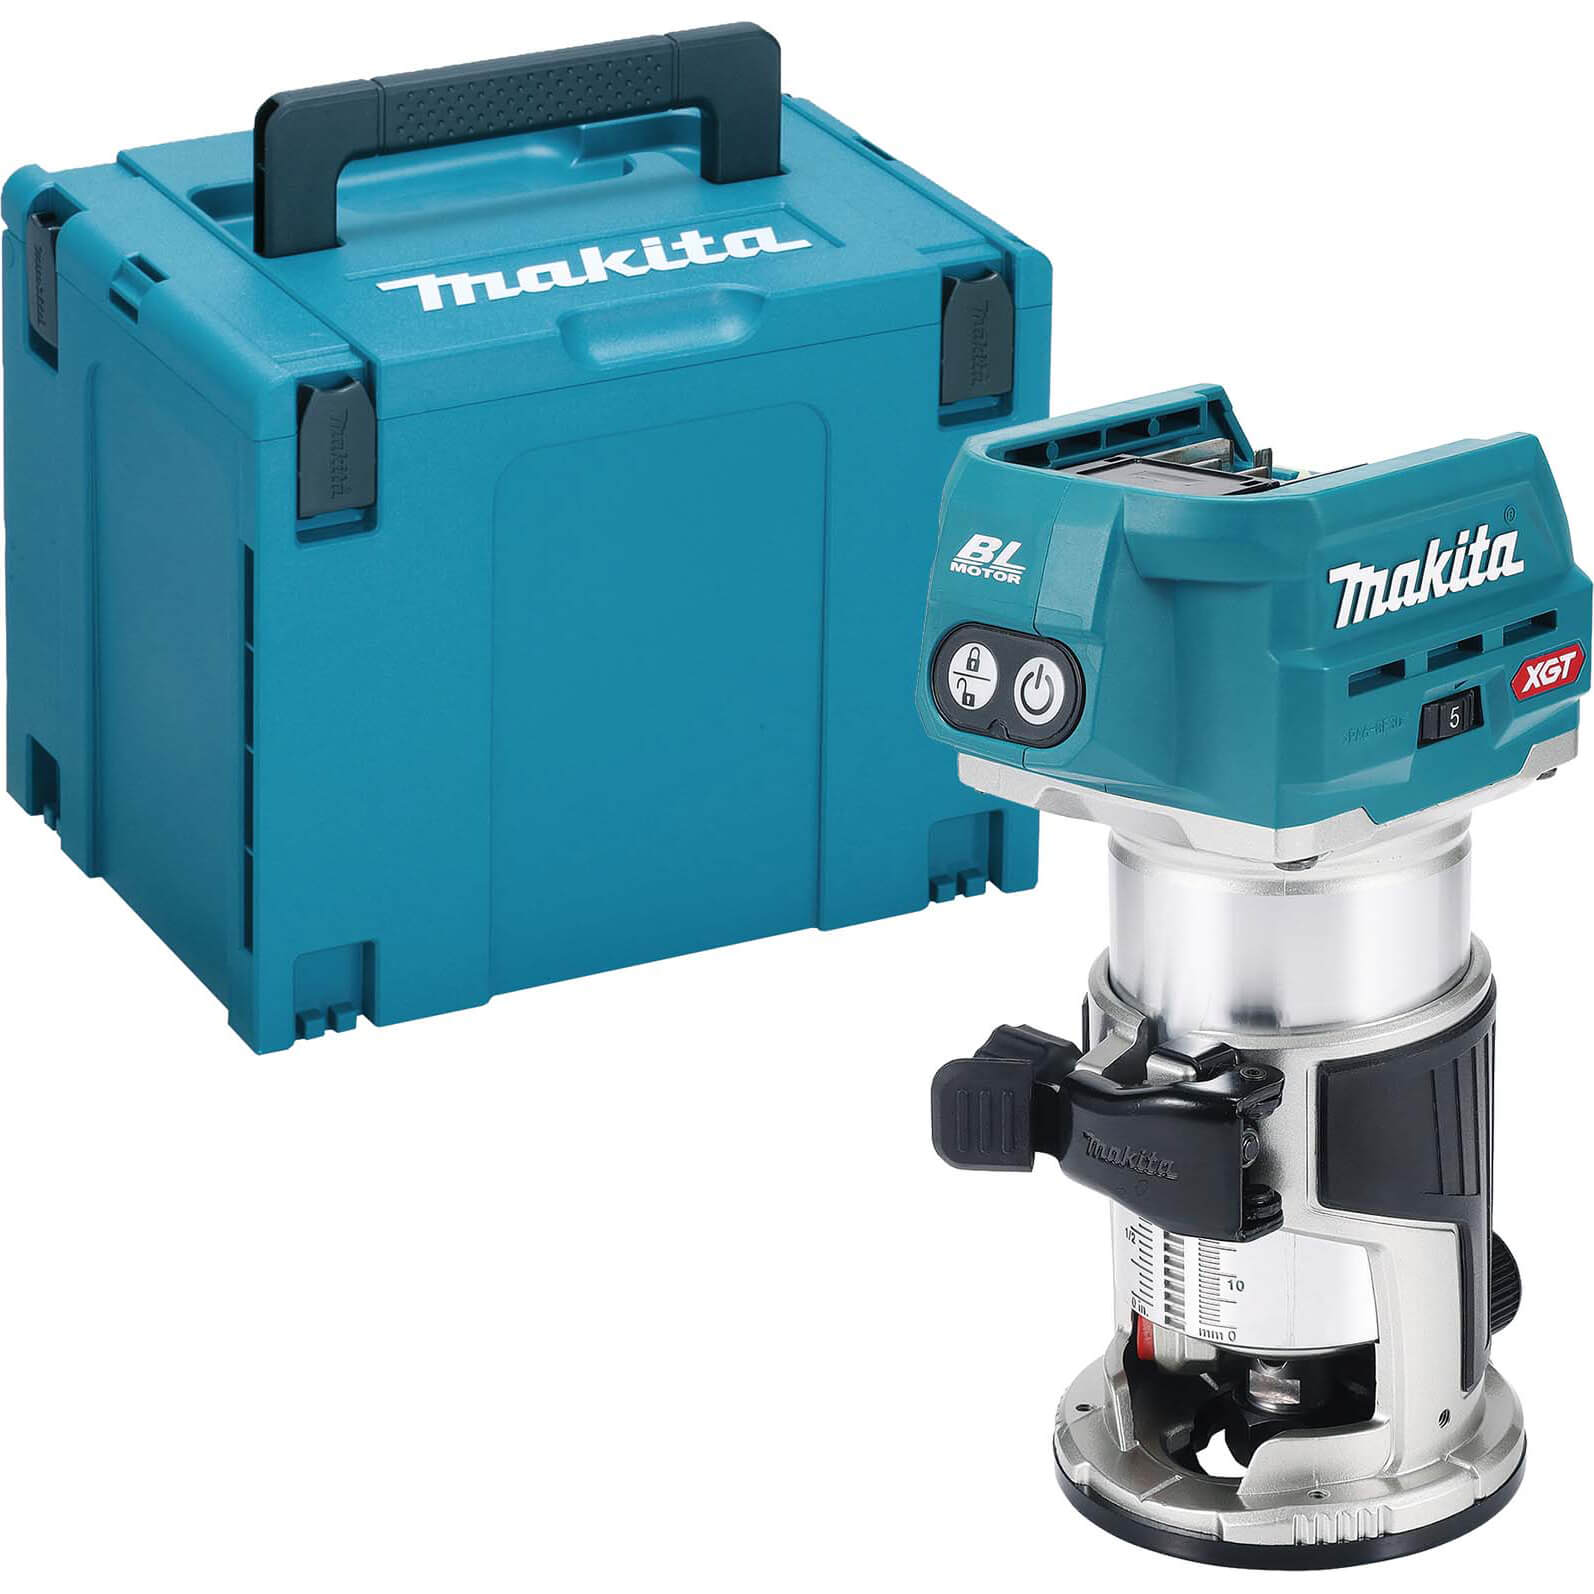 Image of Makita RT001G 40v Max XGT Cordless Brushless 1/4" Trim Router No Batteries No Charger Case & Accessories